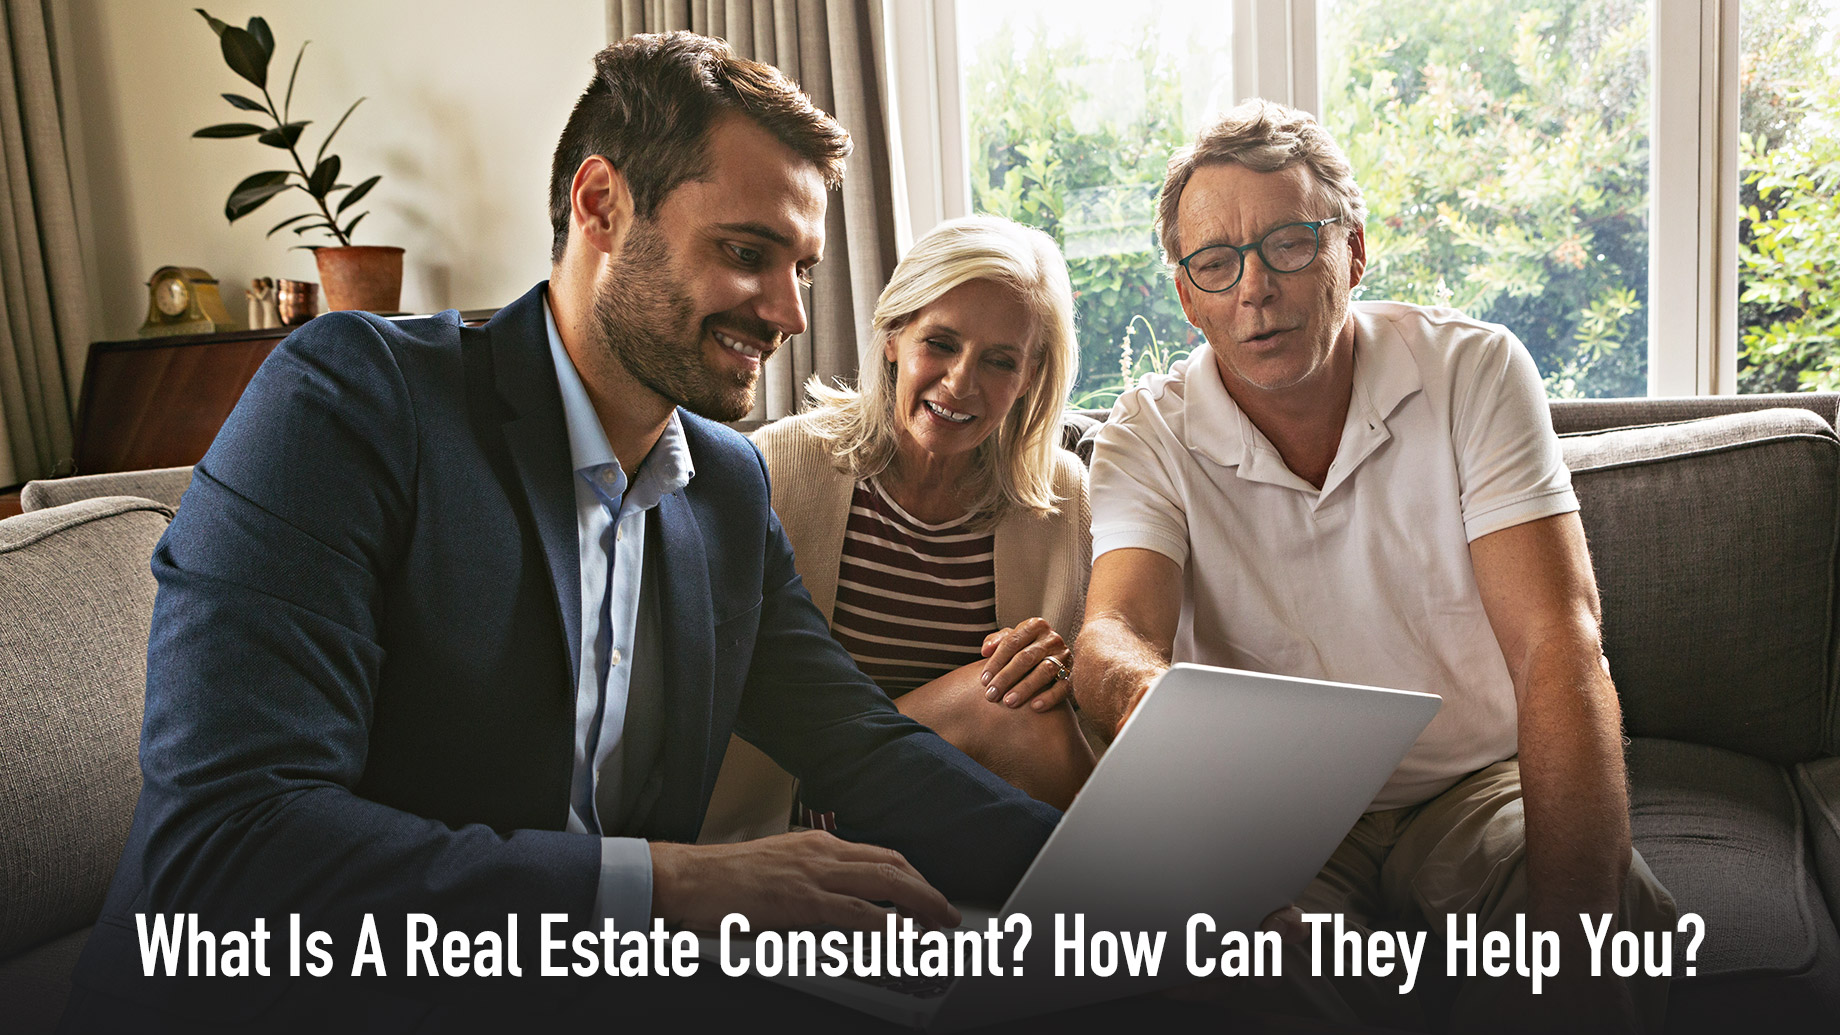 What Is A Real Estate Consultant? How Can They Help You?